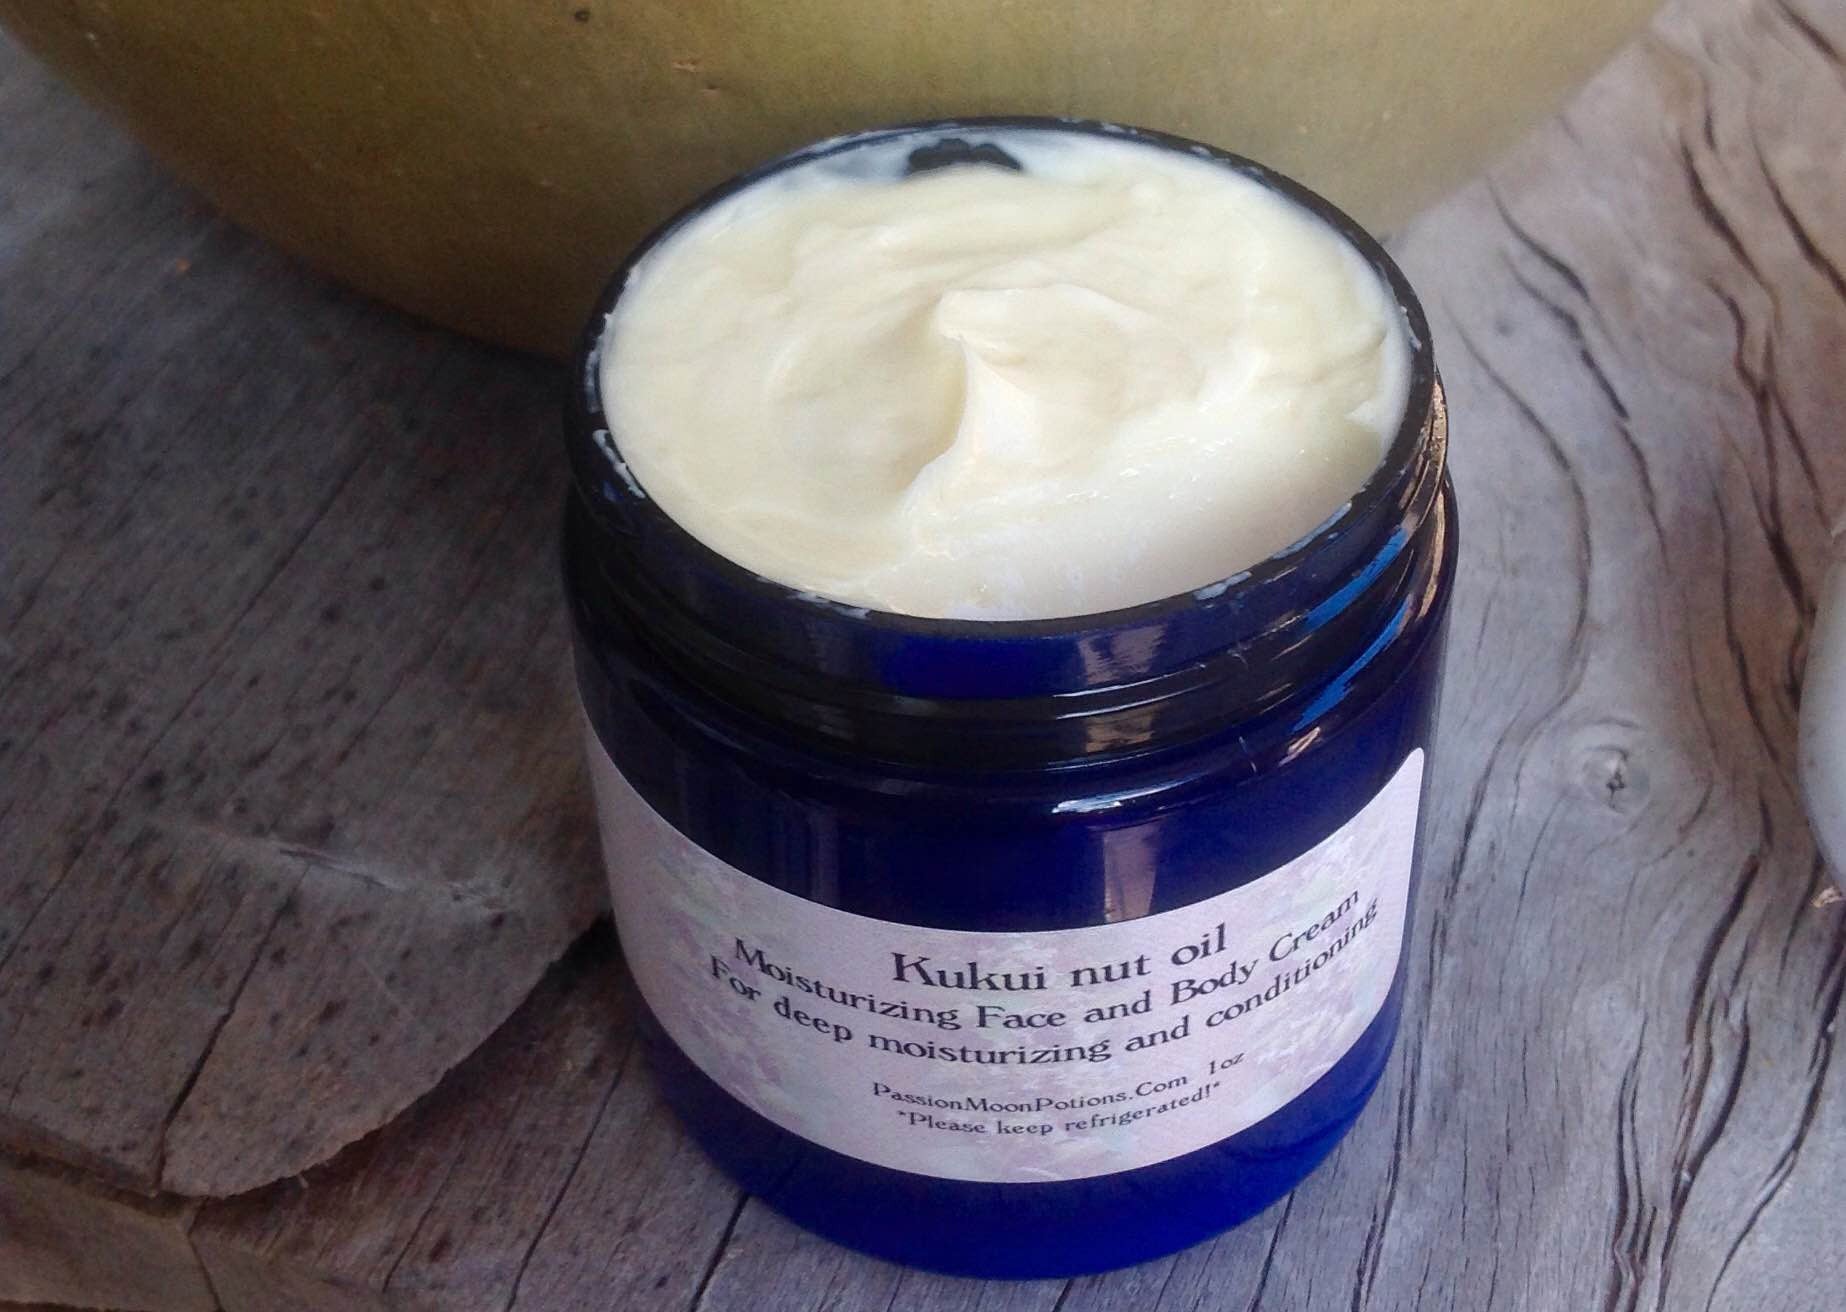 Kukui Nut Oil Moisturizing Face and Body Cream - Passion Moon Potions - 4